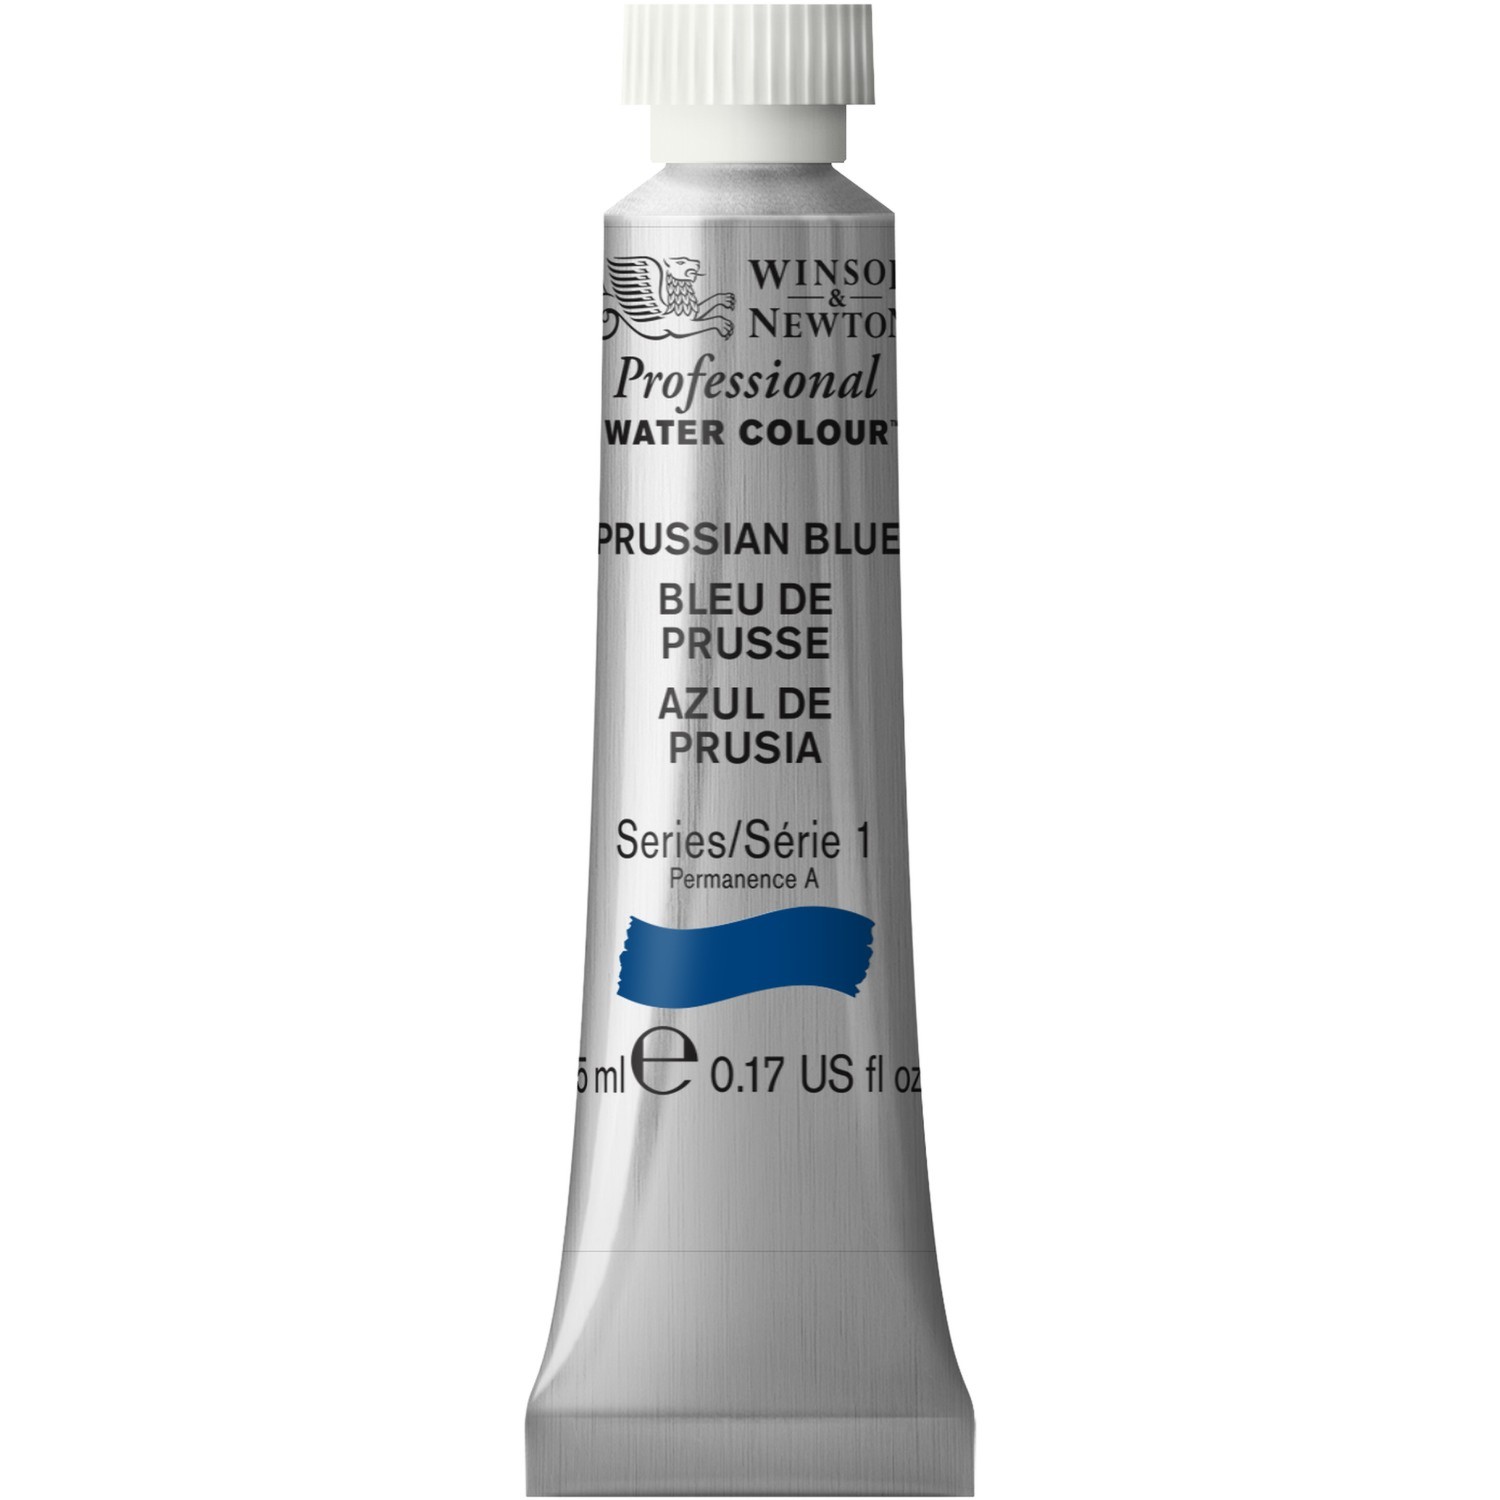 Winsor and Newton 5ml Professional Watercolour Paint - Prussian Blue Image 1